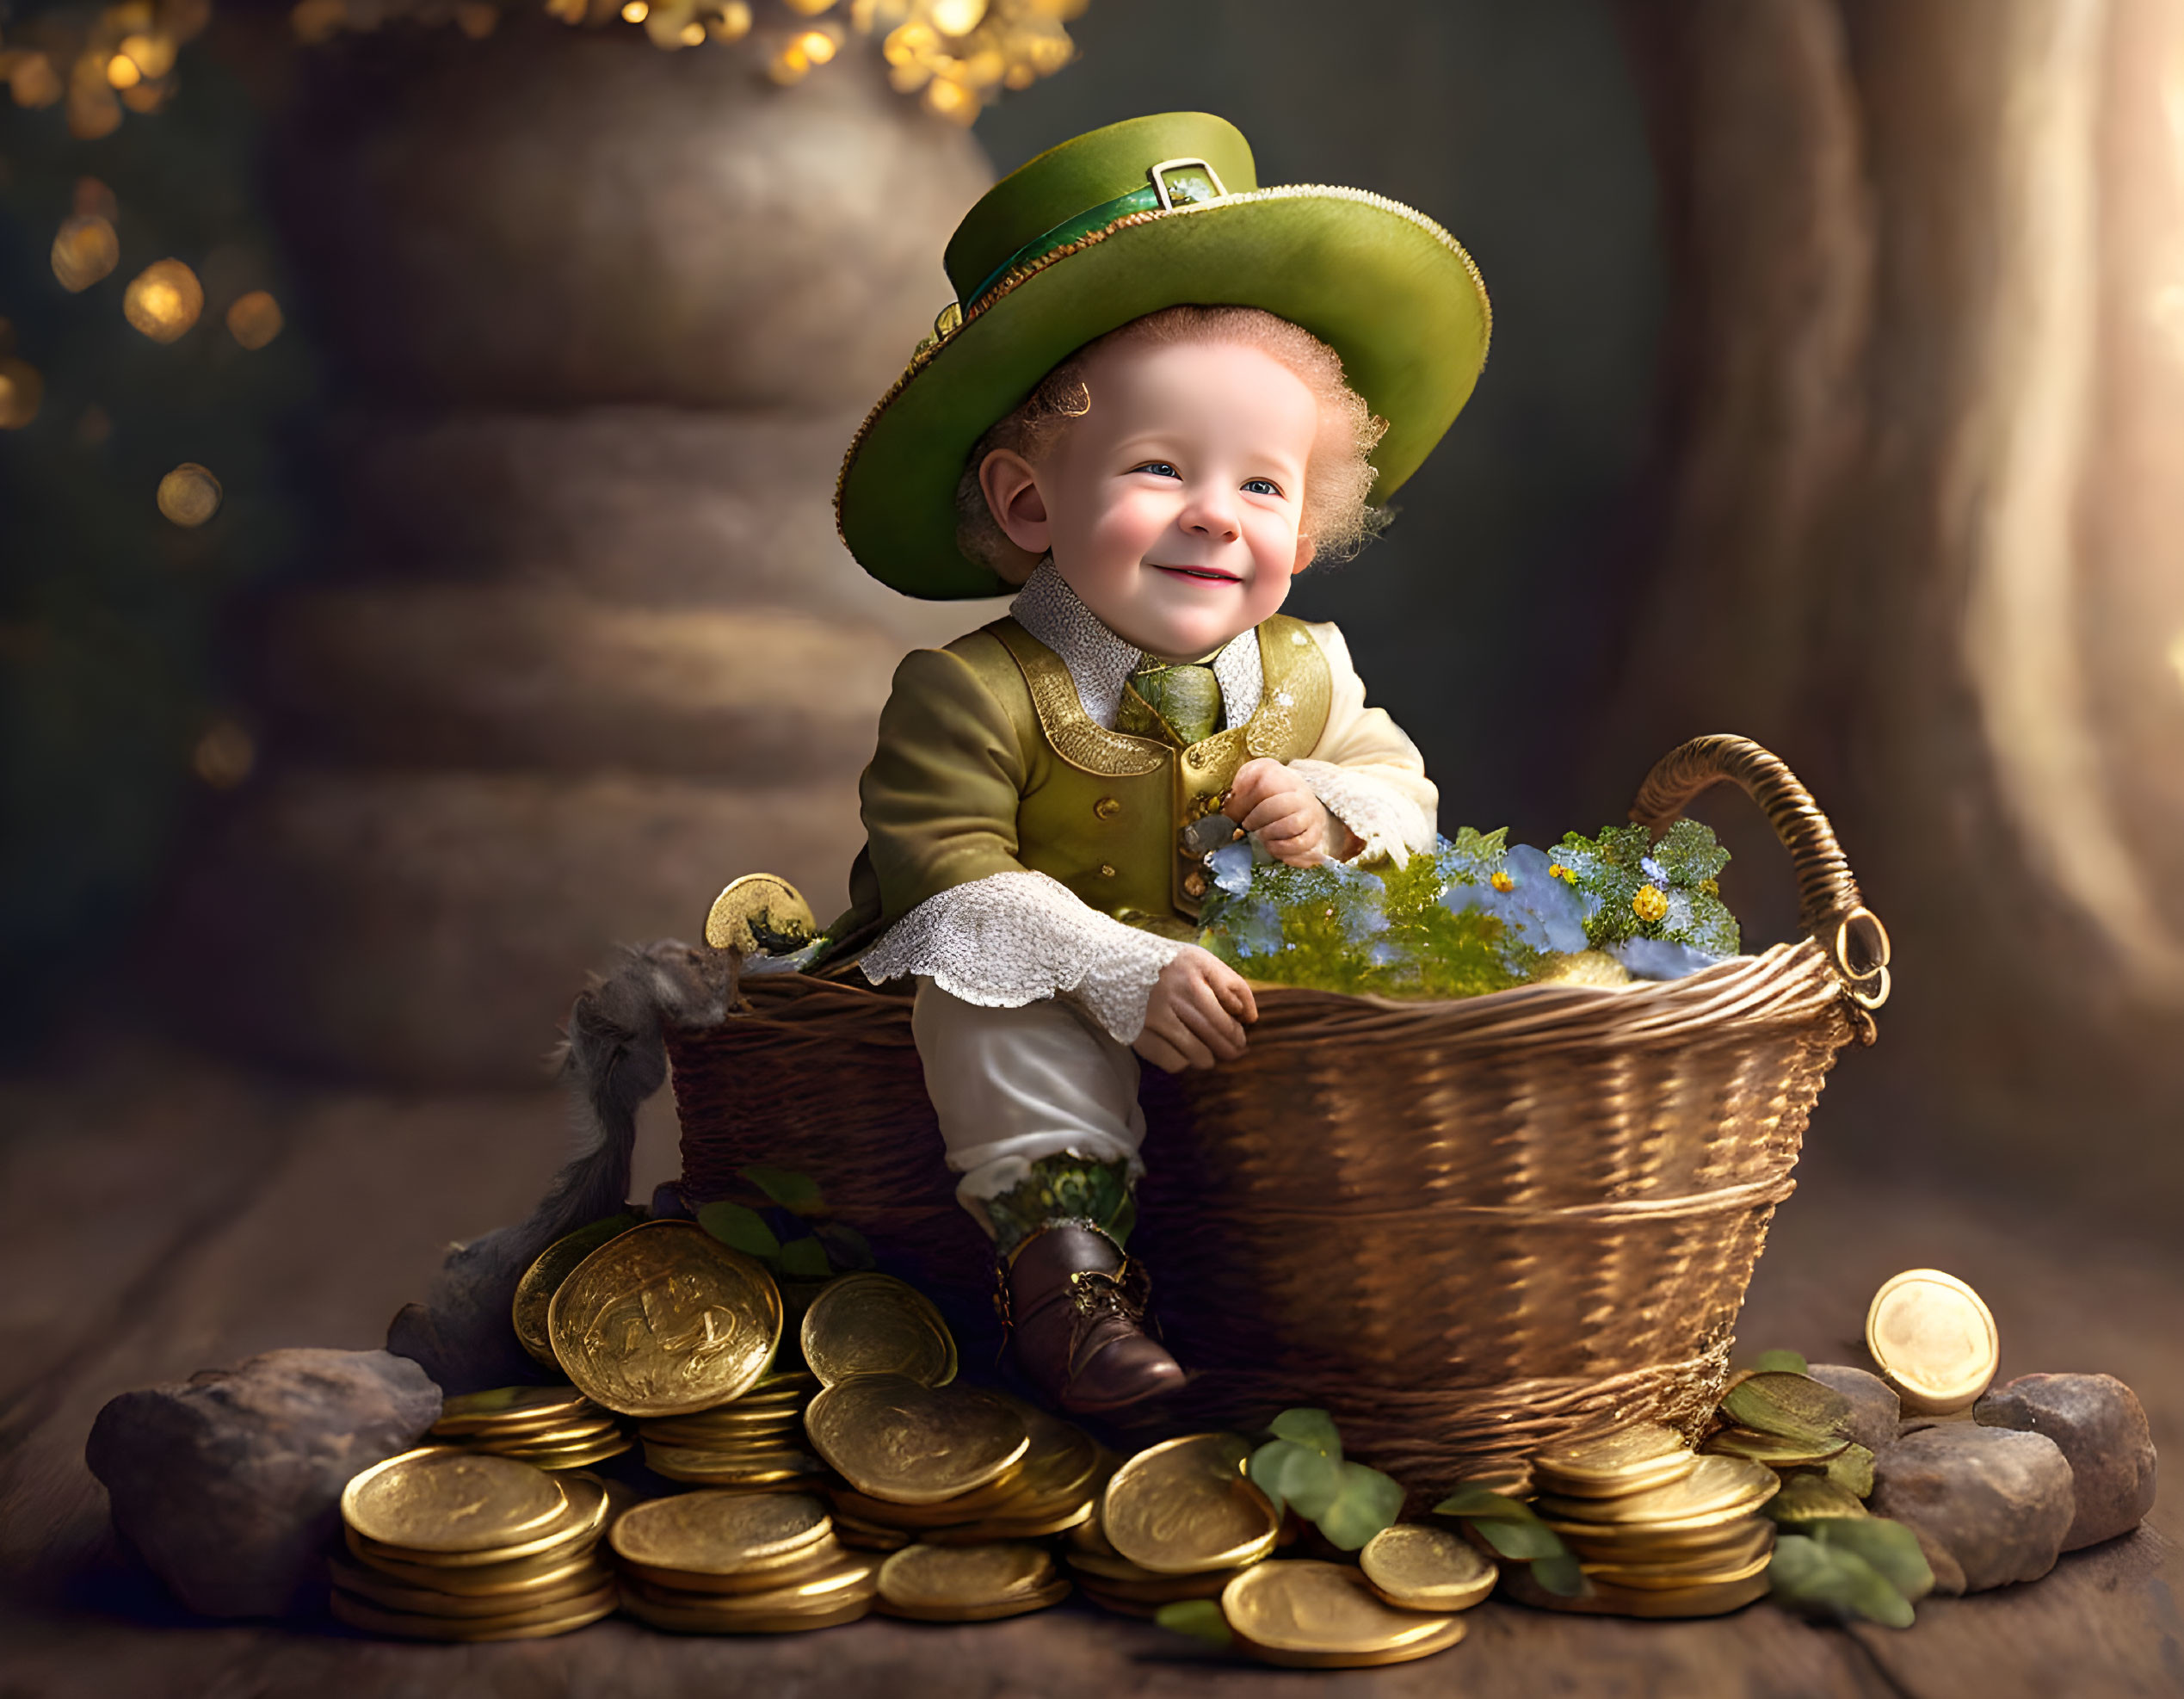 Adorable Baby in Leprechaun Outfit Surrounded by Gold Coins, Flowers